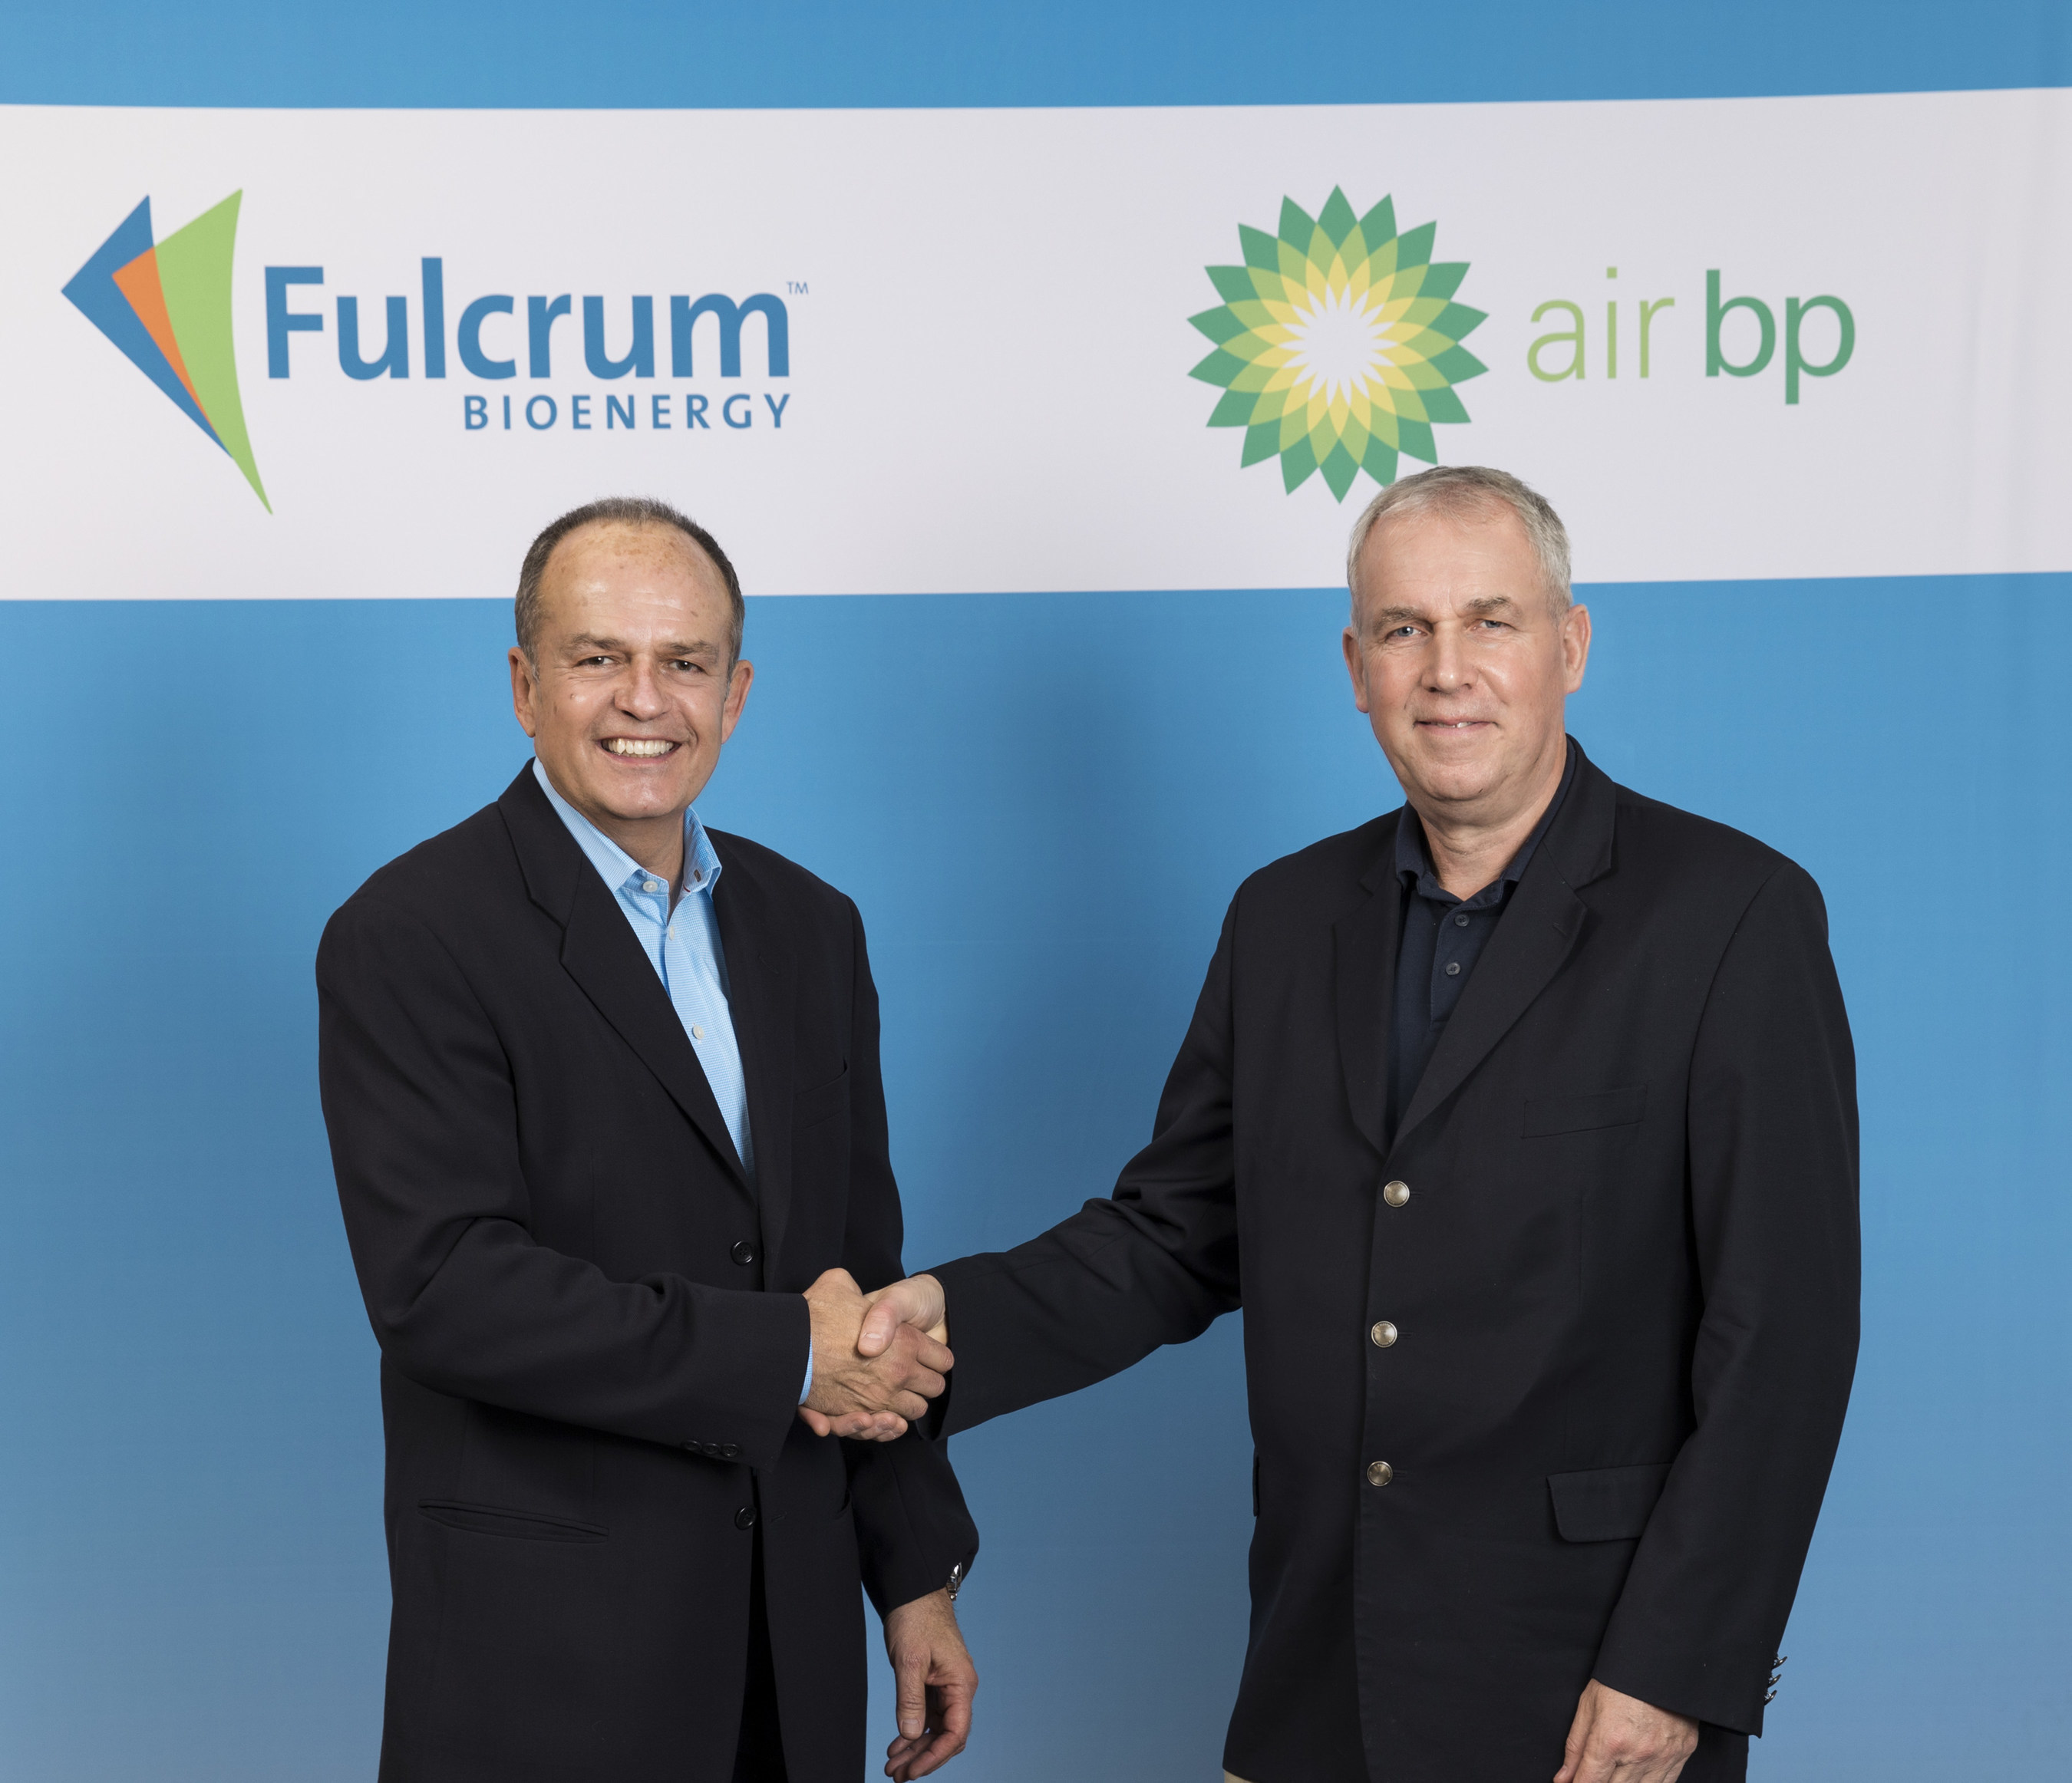 Jim Macias, Fulcrum BioEnergy President and CEO and David Gilmour, BP Vice President - Technology, Commercialization and Ventures announcing the new strategic partnership.